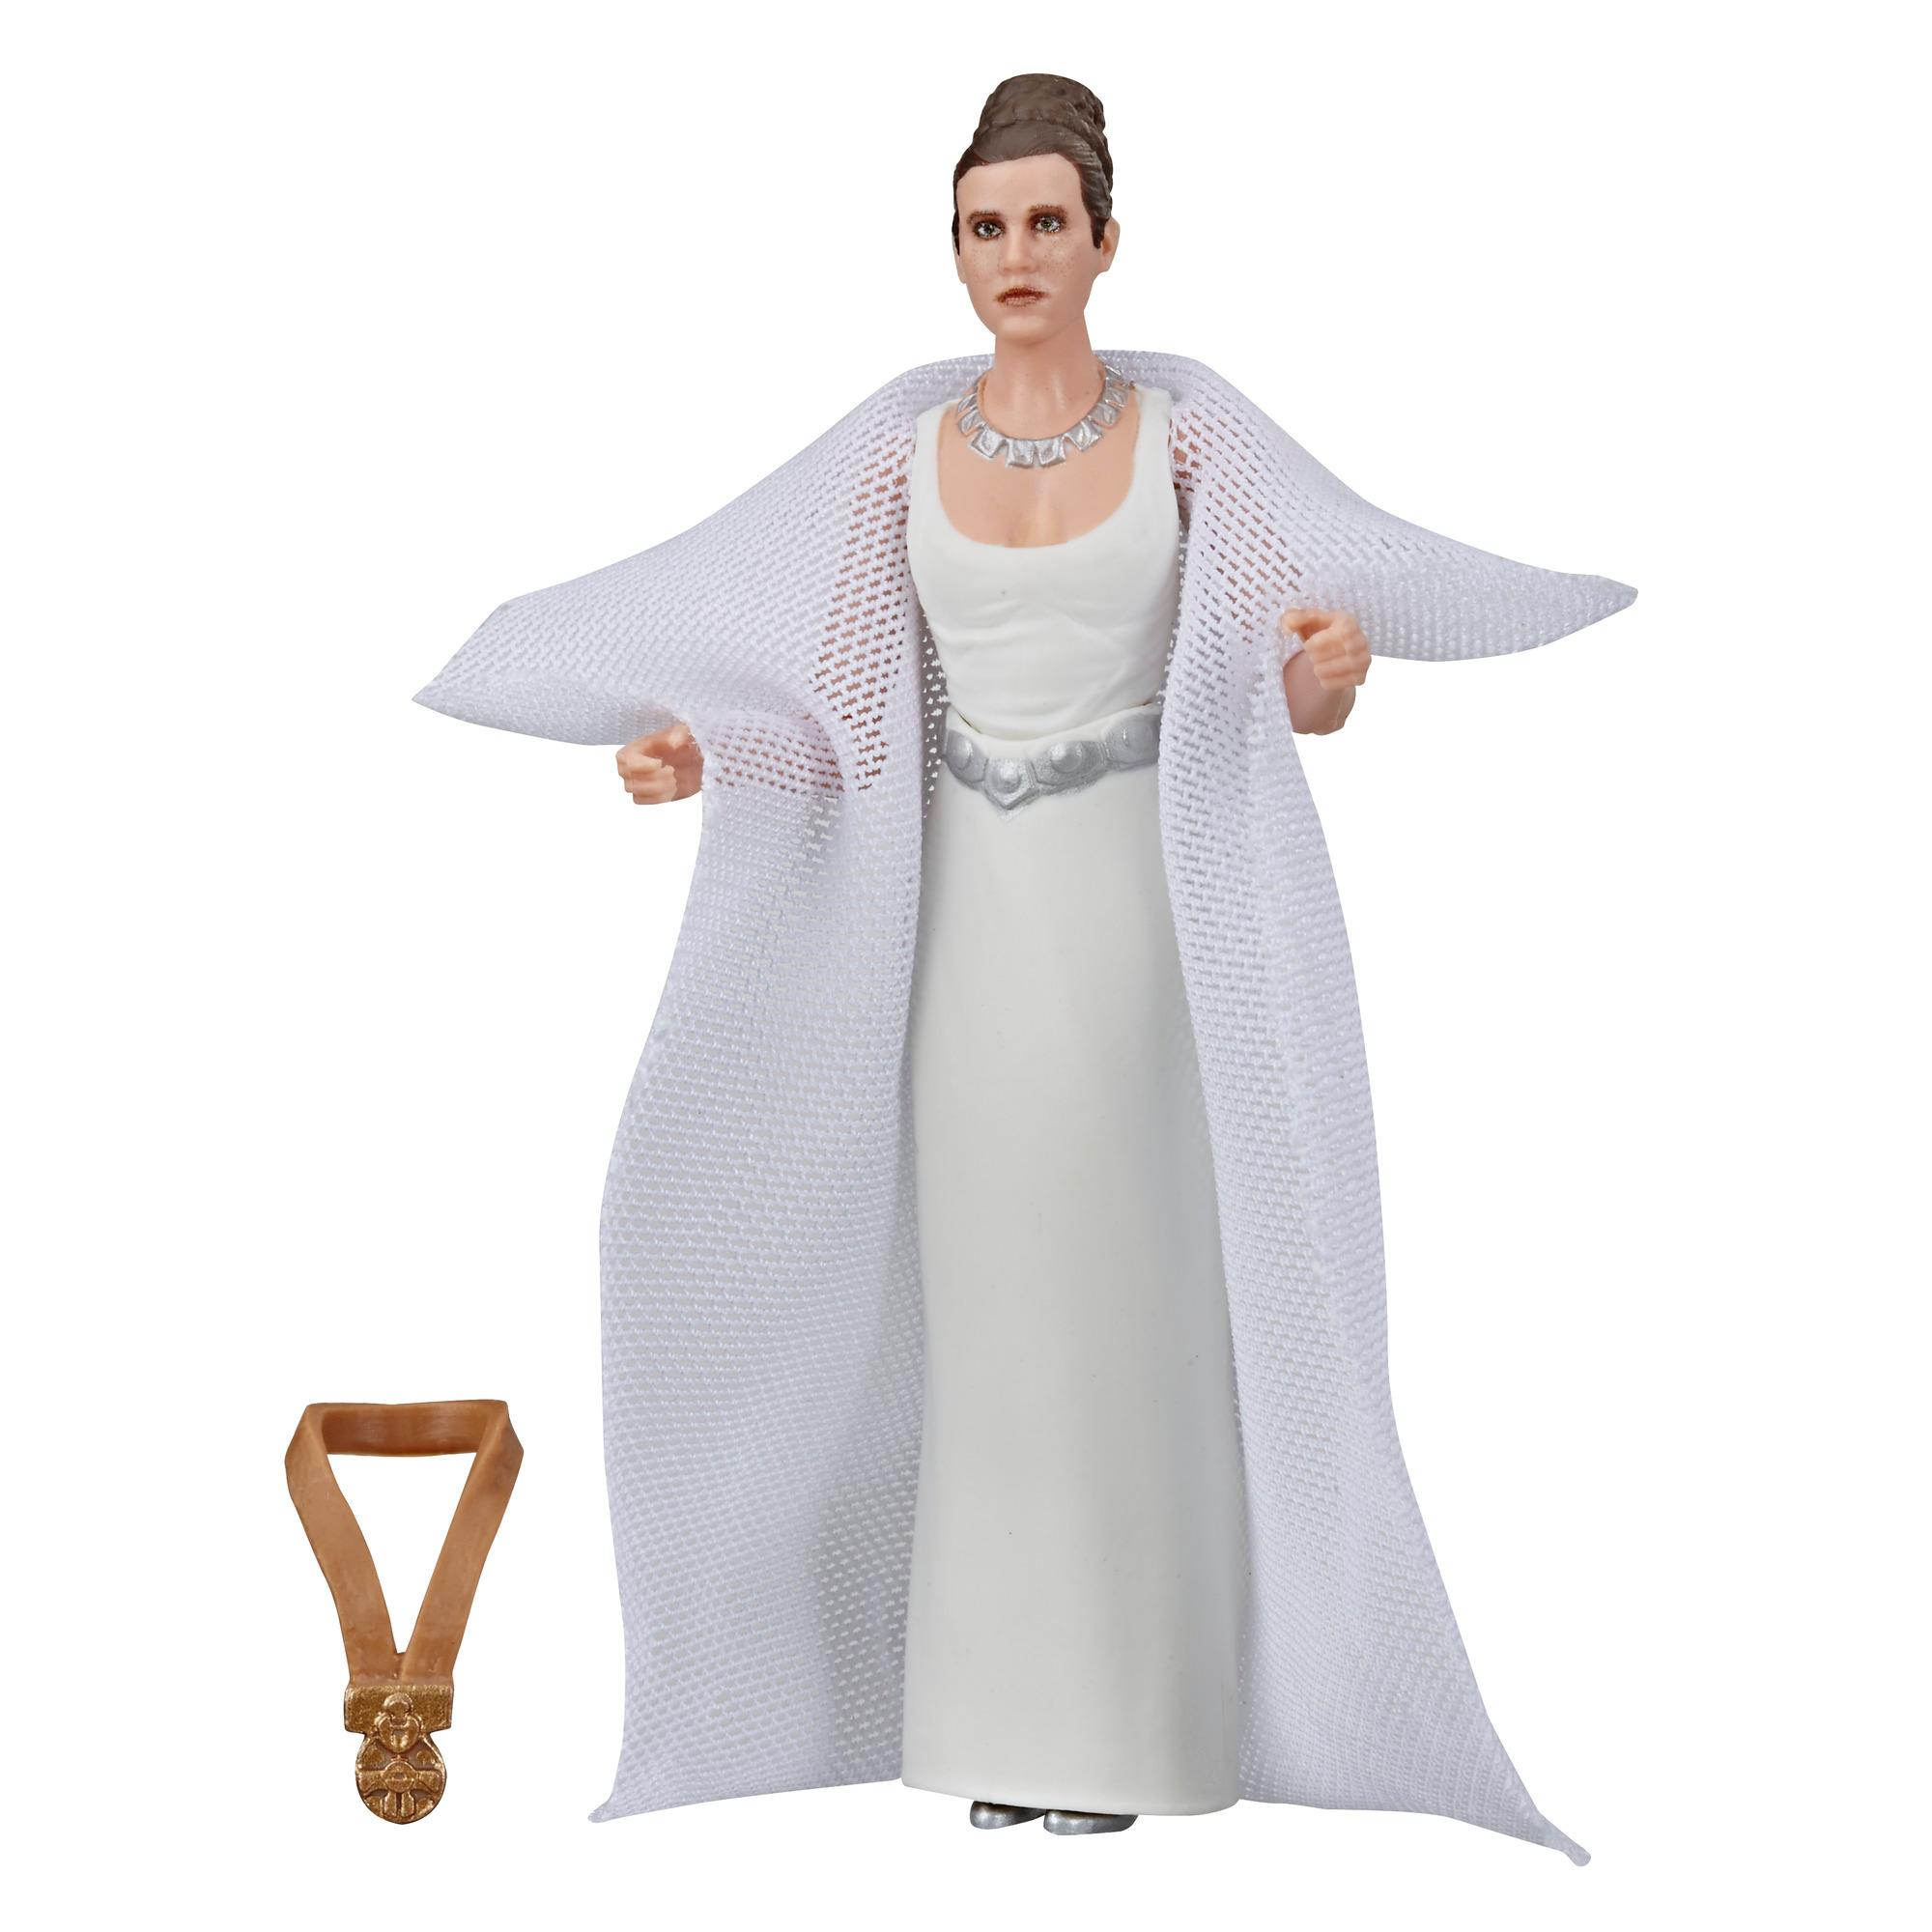 Star Wars The Vintage Collection Star Wars: A New Hope Princess Leia Organa (Yavin) Toy, 3.75-inch Scale Action Figure